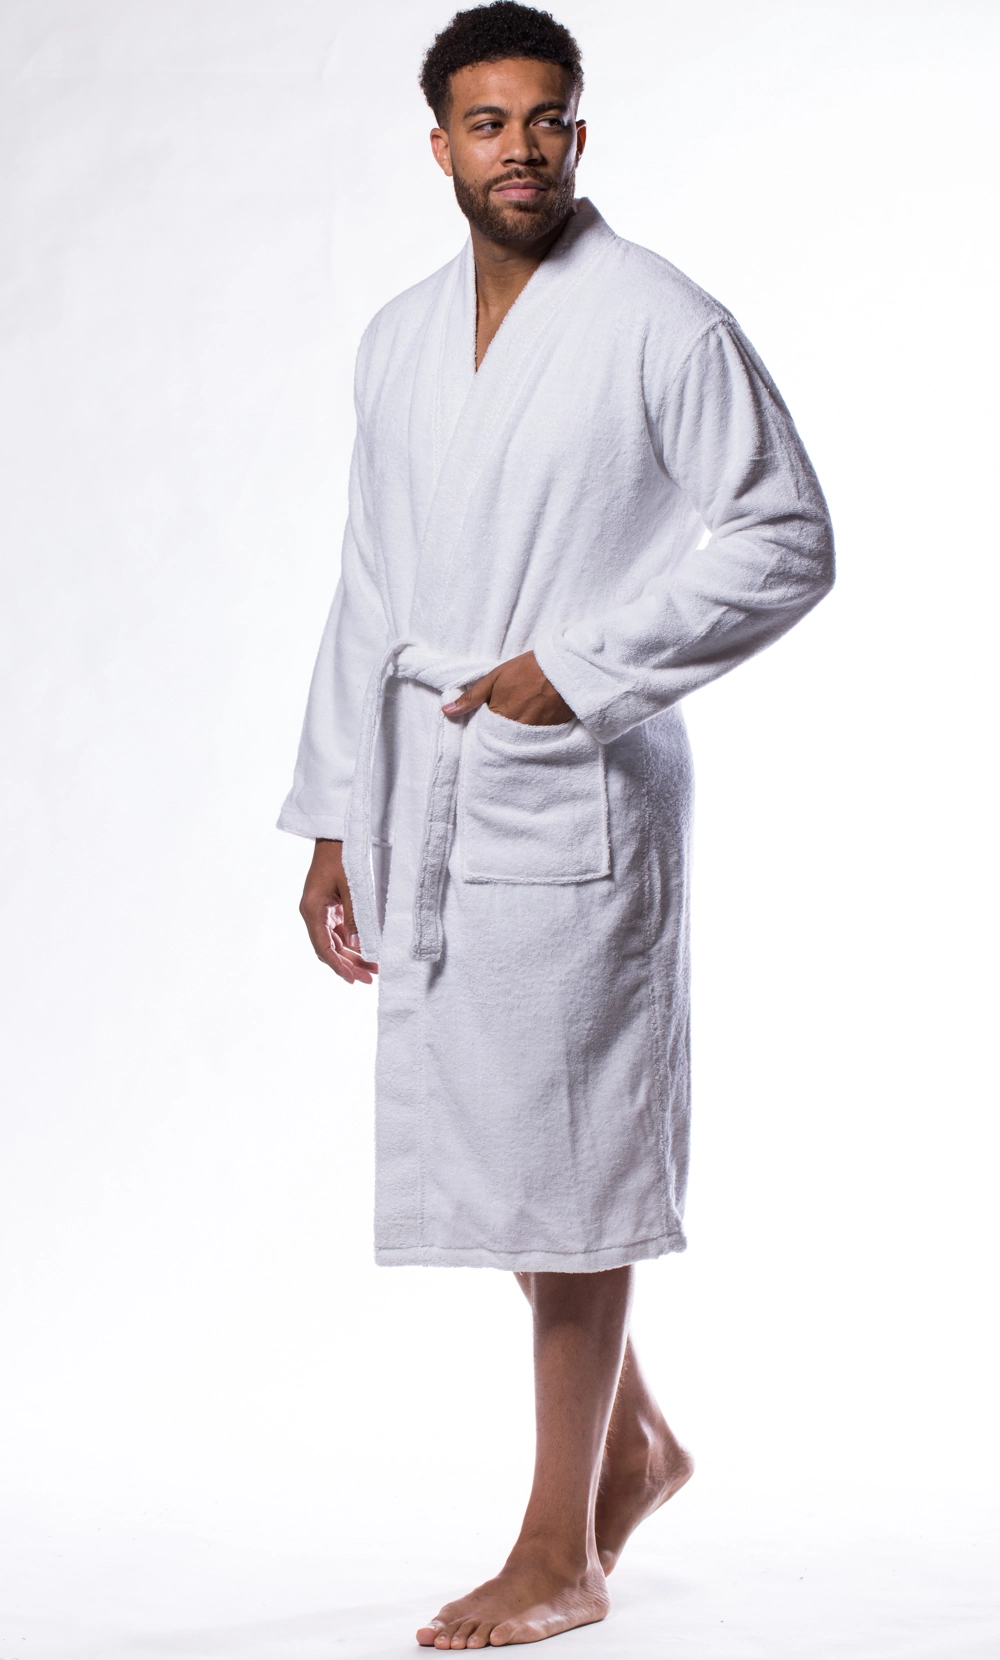 2022 Luxury Spa Towels Wholesale -Winfly